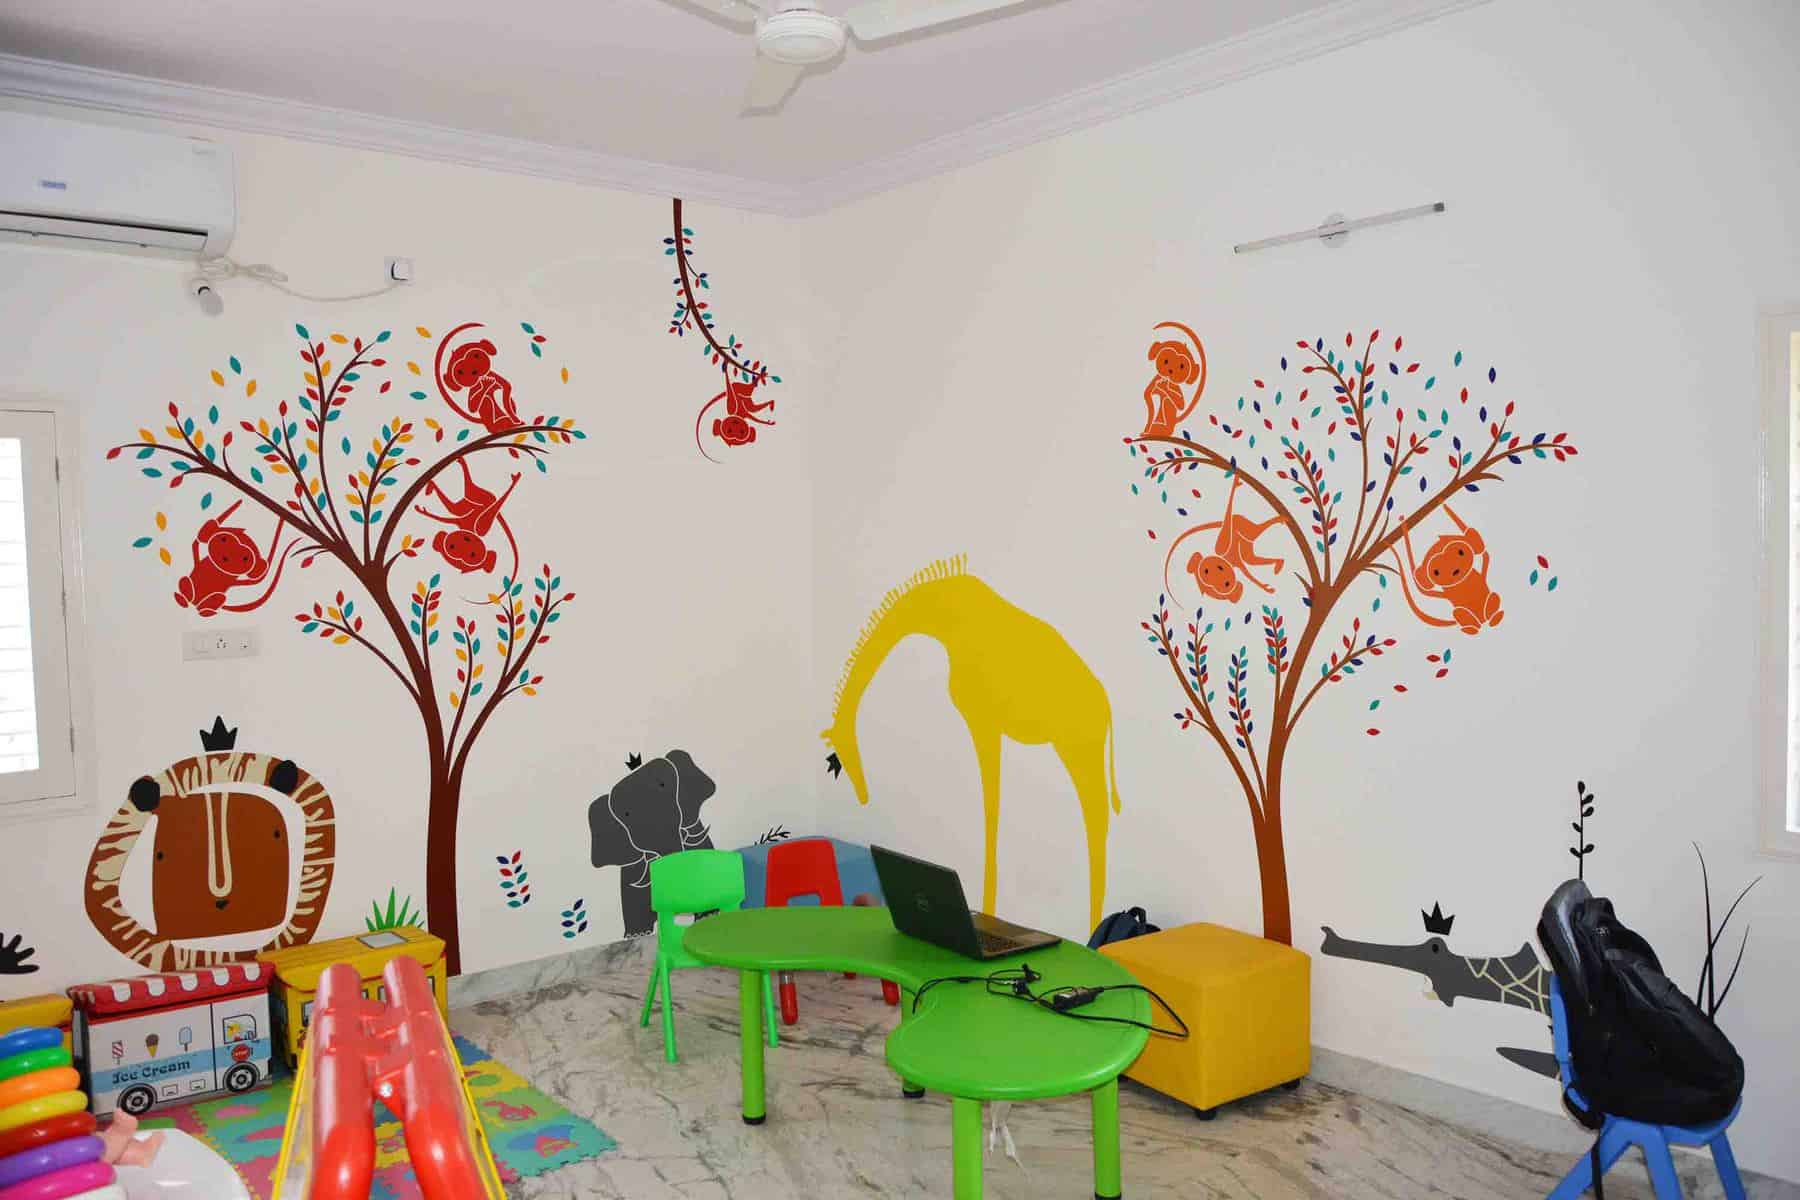 29 Jungle Theme Wall Decoration Ideas To Engage Toddlers And Make Learning Fun At School